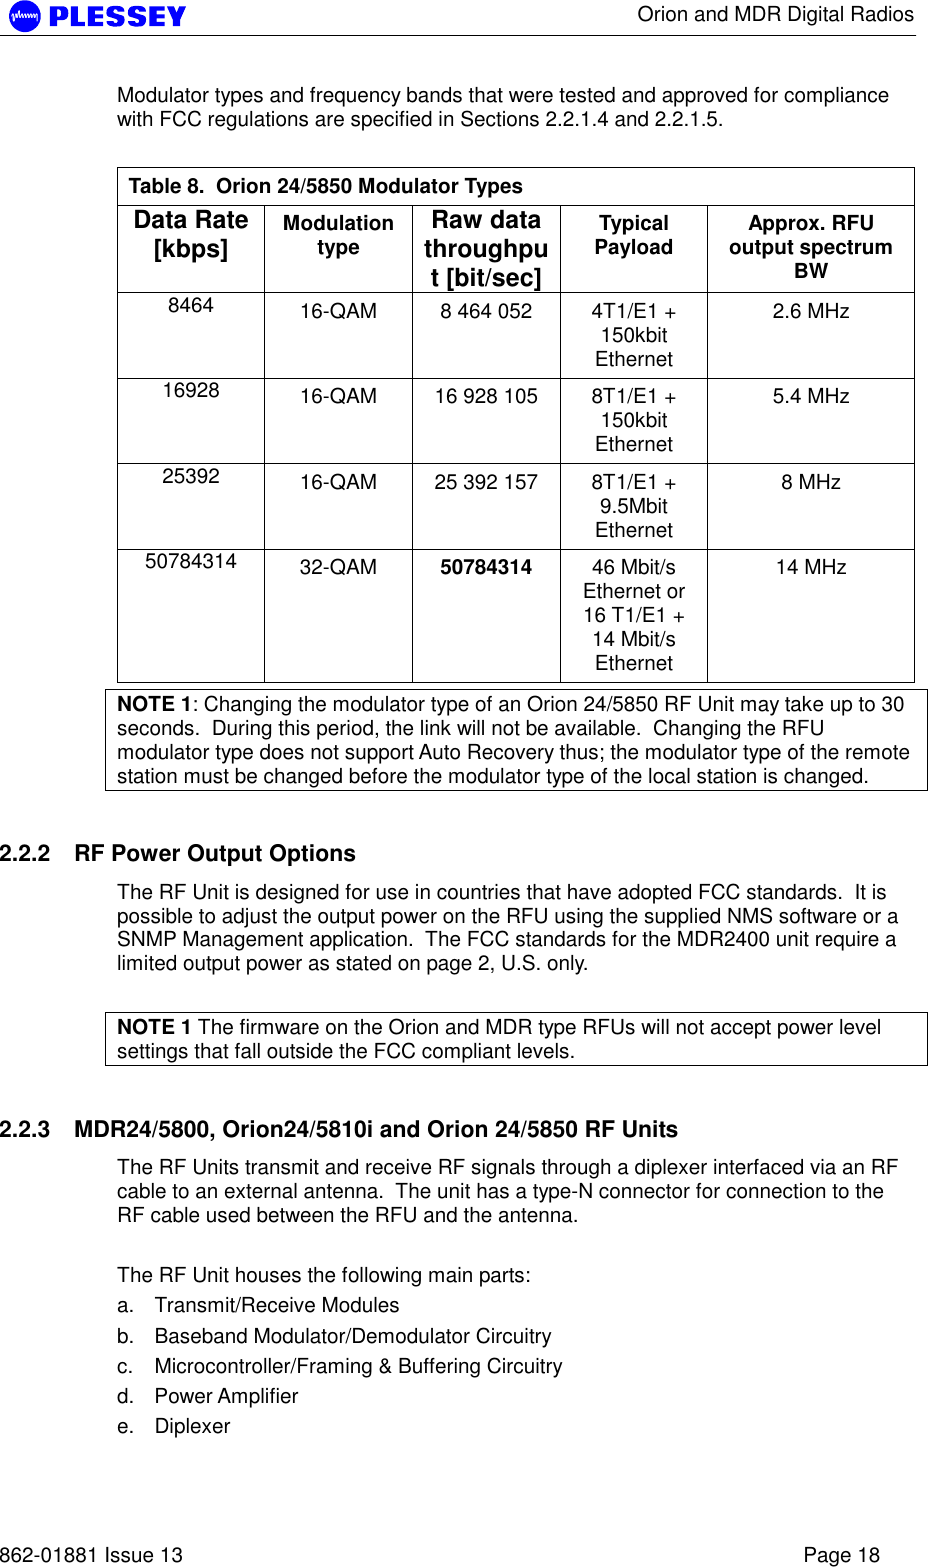      Orion and MDR Digital Radios   862-01881 Issue 13    Page 18 Modulator types and frequency bands that were tested and approved for compliance with FCC regulations are specified in Sections 2.2.1.4 and 2.2.1.5.  Table 8.  Orion 24/5850 Modulator Types Data Rate [kbps]  Modulation type  Raw data throughput [bit/sec] Typical Payload  Approx. RFU output spectrum BW 8464  16-QAM  8 464 052  4T1/E1 + 150kbit Ethernet 2.6 MHz 16928  16-QAM  16 928 105  8T1/E1 + 150kbit Ethernet 5.4 MHz 25392  16-QAM  25 392 157  8T1/E1 + 9.5Mbit Ethernet 8 MHz 50784314  32-QAM  50784314 46 Mbit/s Ethernet or 16 T1/E1 + 14 Mbit/s Ethernet 14 MHz NOTE 1: Changing the modulator type of an Orion 24/5850 RF Unit may take up to 30 seconds.  During this period, the link will not be available.  Changing the RFU modulator type does not support Auto Recovery thus; the modulator type of the remote station must be changed before the modulator type of the local station is changed. 2.2.2  RF Power Output Options The RF Unit is designed for use in countries that have adopted FCC standards.  It is possible to adjust the output power on the RFU using the supplied NMS software or a SNMP Management application.  The FCC standards for the MDR2400 unit require a limited output power as stated on page 2, U.S. only.   NOTE 1 The firmware on the Orion and MDR type RFUs will not accept power level settings that fall outside the FCC compliant levels. 2.2.3  MDR24/5800, Orion24/5810i and Orion 24/5850 RF Units The RF Units transmit and receive RF signals through a diplexer interfaced via an RF cable to an external antenna.  The unit has a type-N connector for connection to the RF cable used between the RFU and the antenna.  The RF Unit houses the following main parts: a. Transmit/Receive Modules b.  Baseband Modulator/Demodulator Circuitry c.  Microcontroller/Framing &amp; Buffering Circuitry  d. Power Amplifier  e. Diplexer  